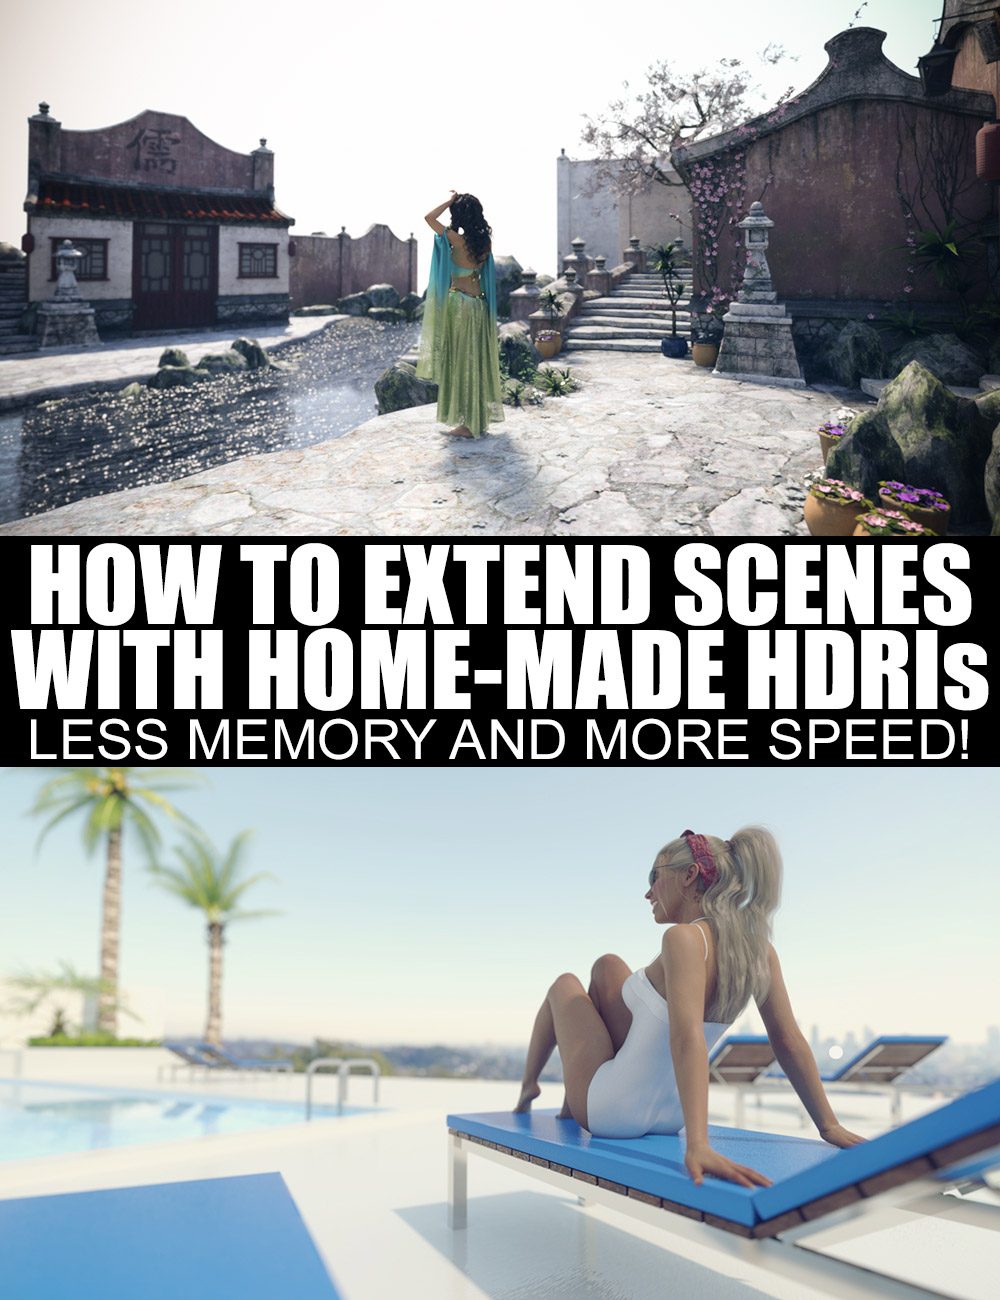 How To Extend Scenes With Home-Made HDRIs by: Dreamlight, 3D Models by Daz 3D